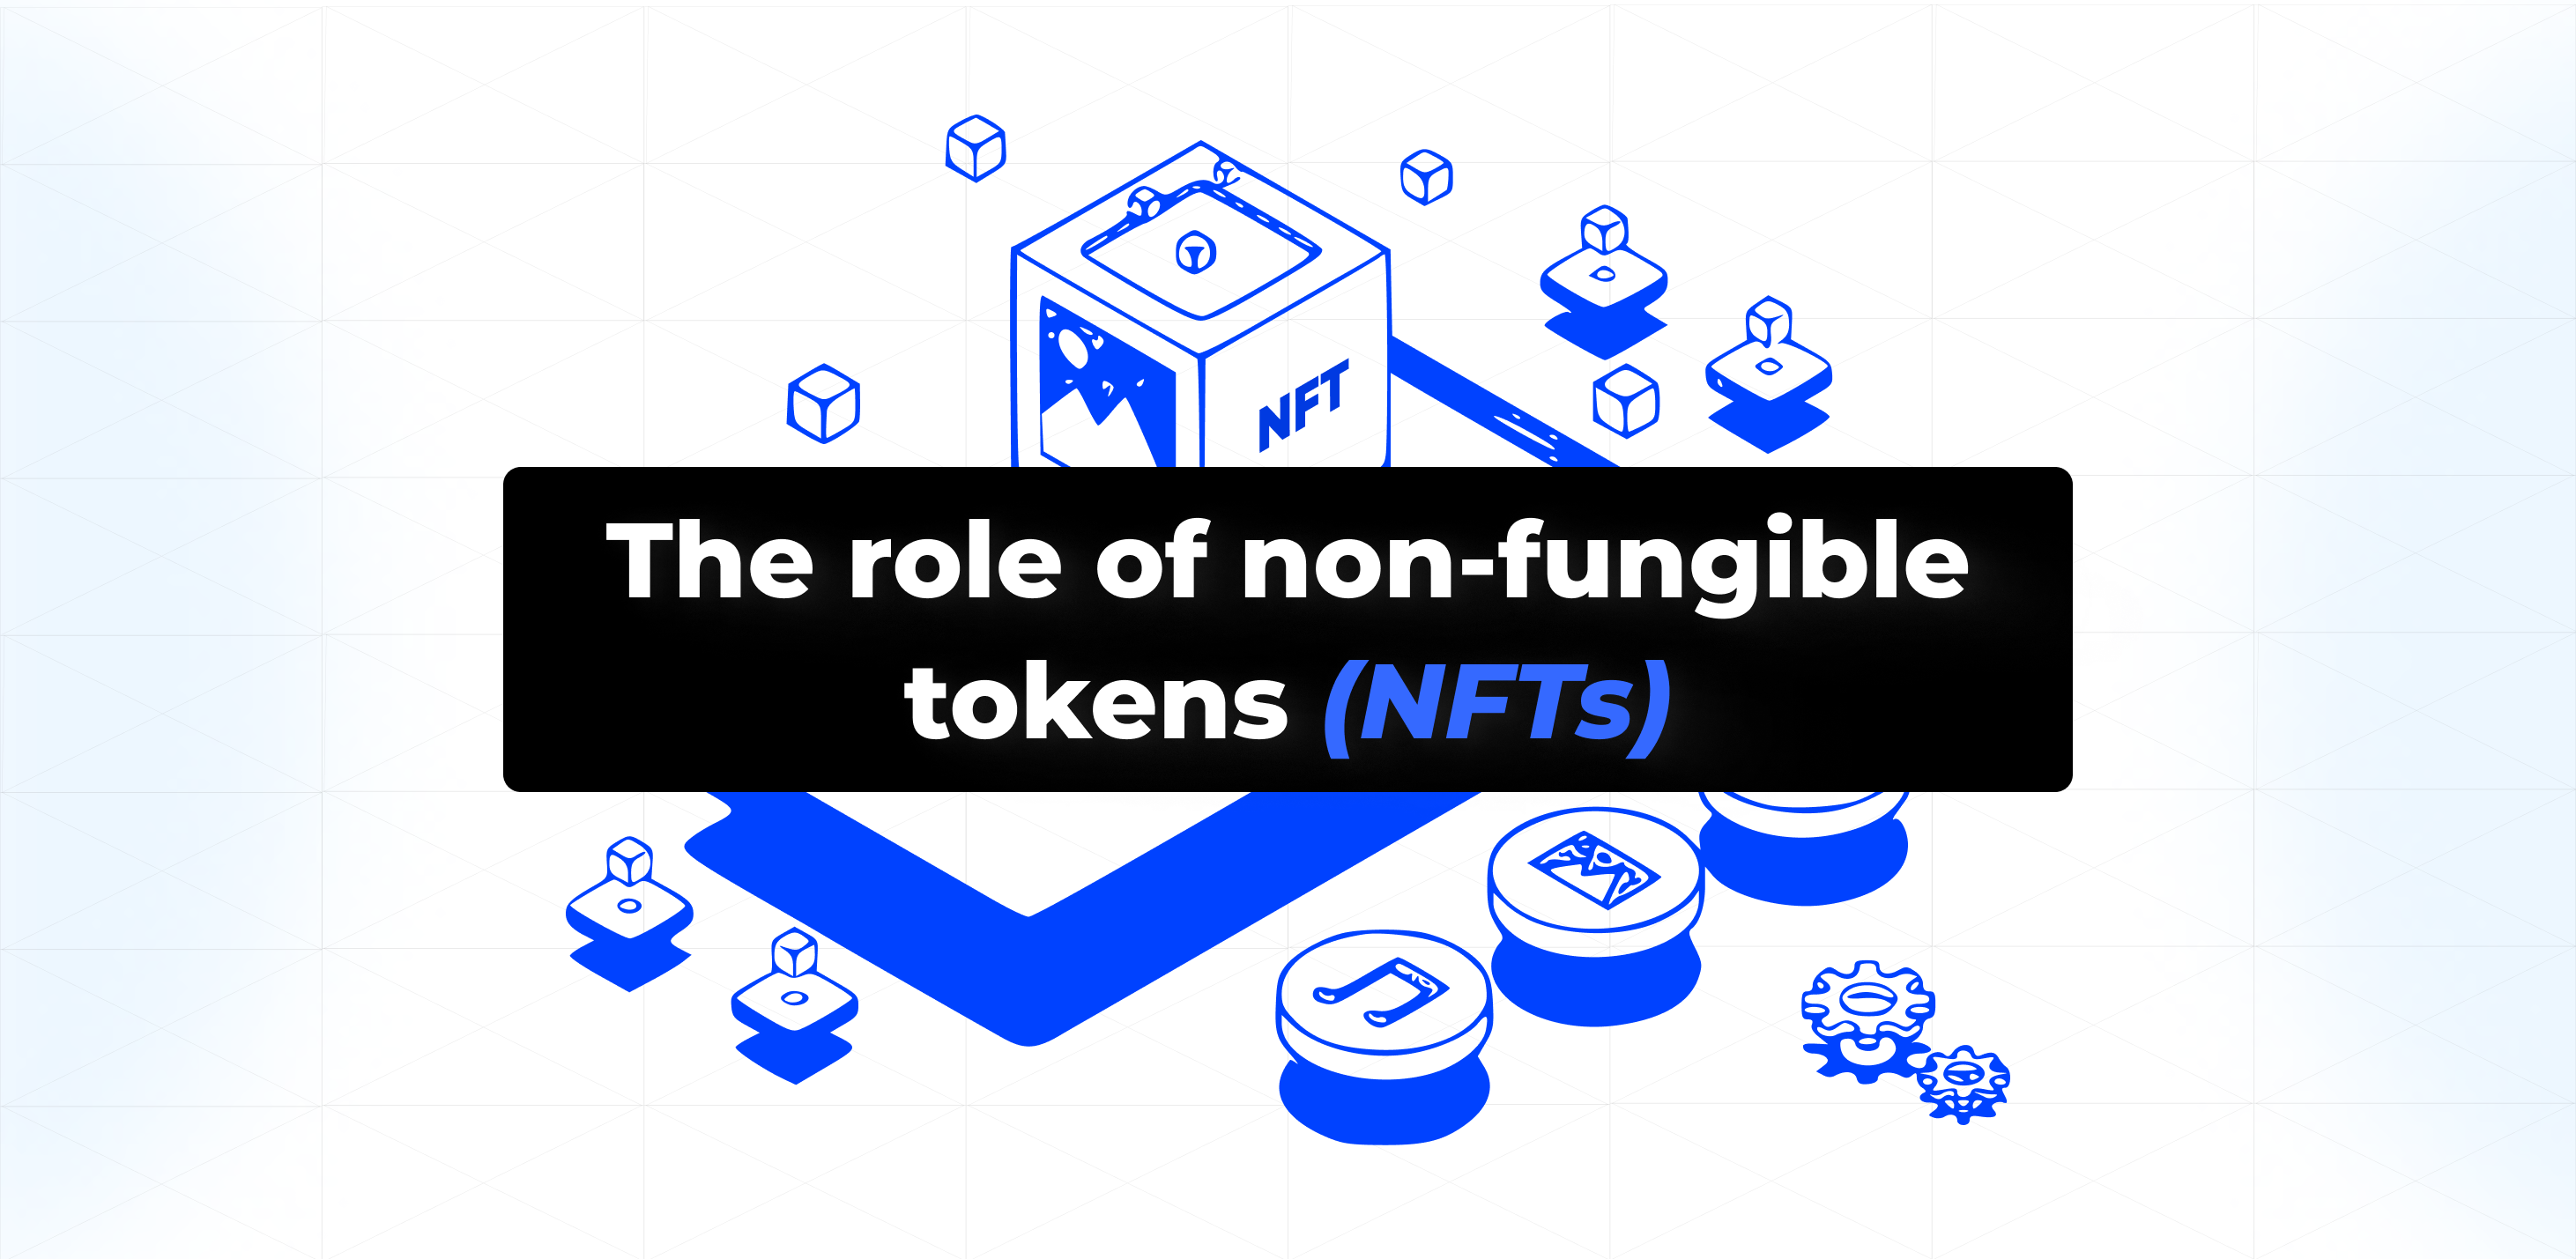 The role of non-fungible tokens (NFTs) in digital payments